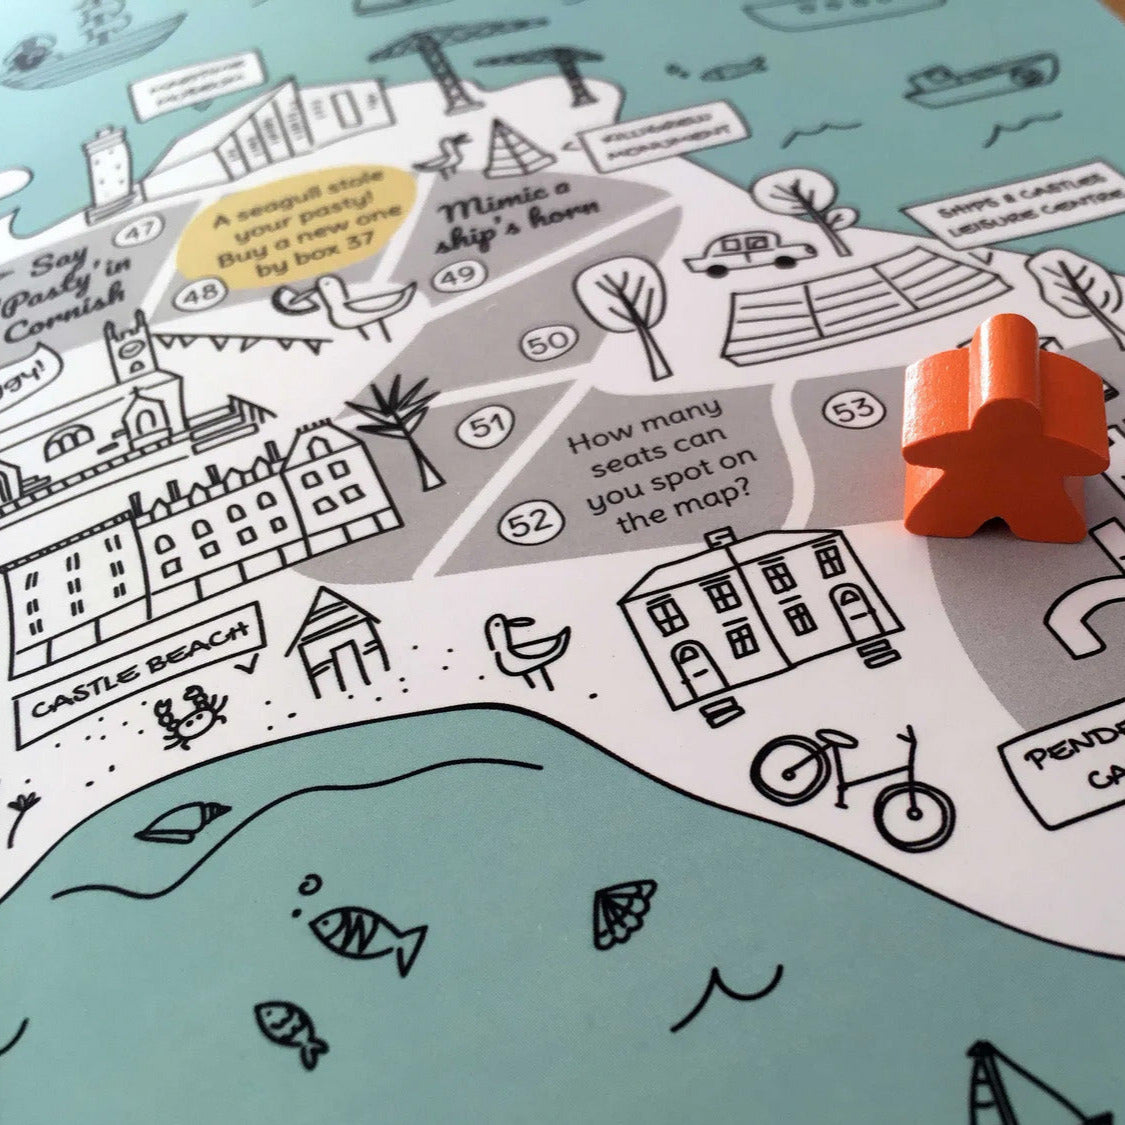 Falmouth board game map. Wooden dice and coloured marker.